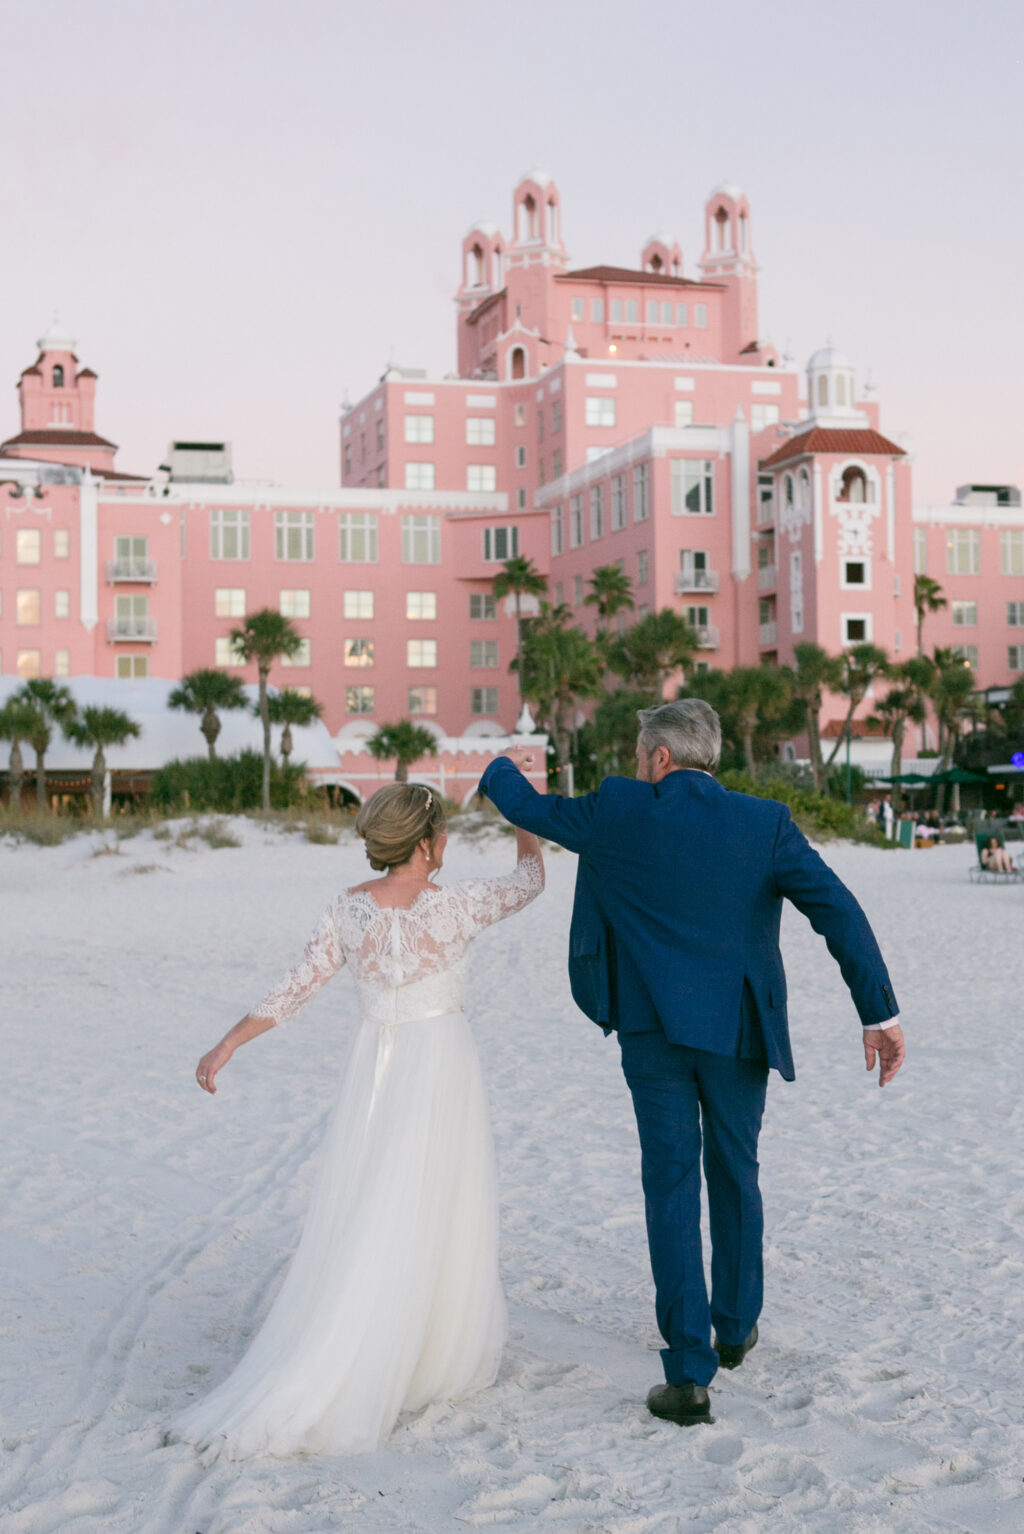 Sunset Classic Bride and Groom on Beach of St. Pete Historic Wedding Venue The Don CeSar, The Pink Palace | Wedding Photographer Carrie Wildes Photography